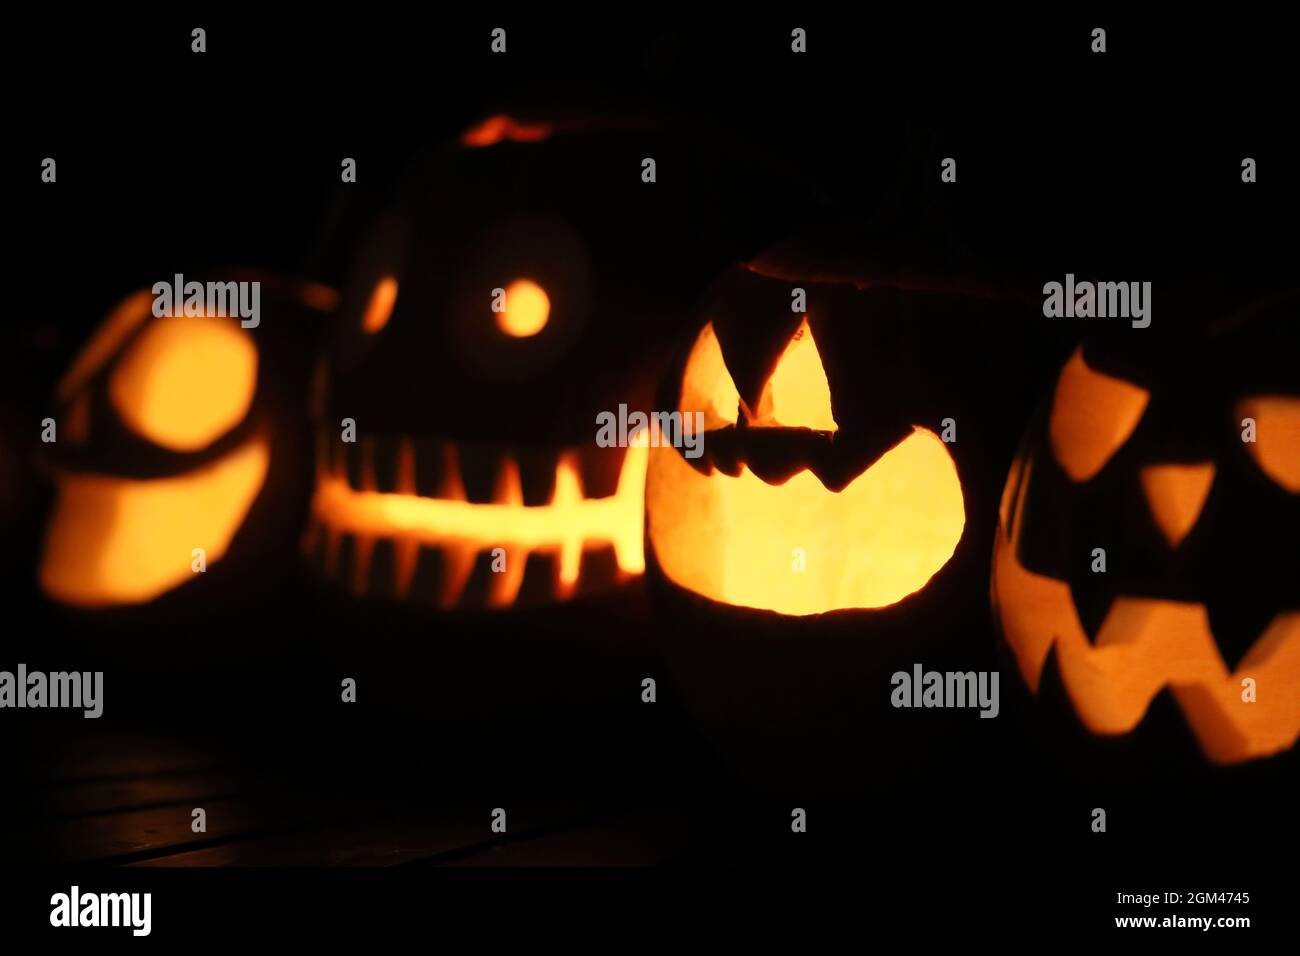 The danes have picked up the holloween tradition. Here a row of halloween jack-o'-lanterns carved out of pumpkins. Randbøldal, Denmark 2020 Stock Photo